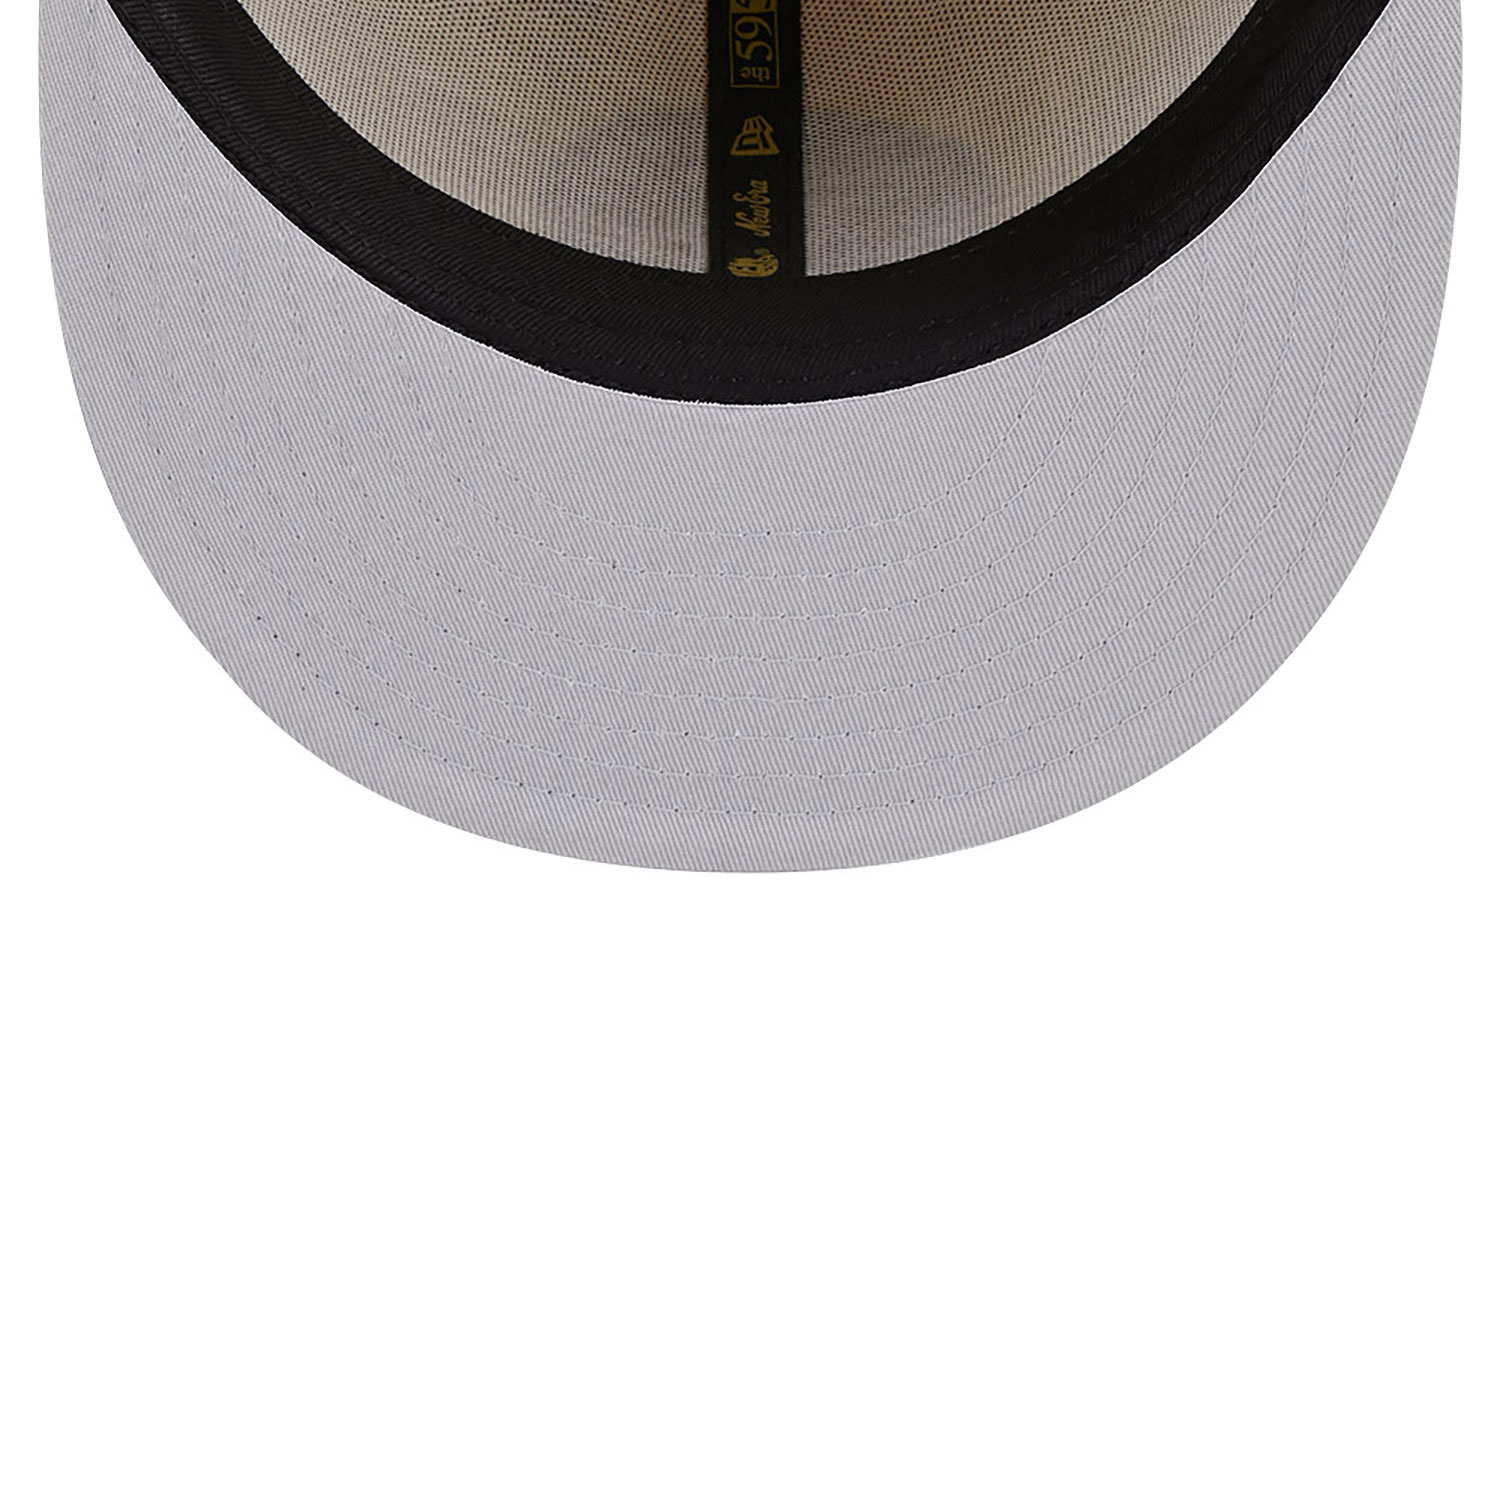 Official New Era 59FIFTY Day 59FIFTY Fitted Cap D01_887 | New Era Cap ...